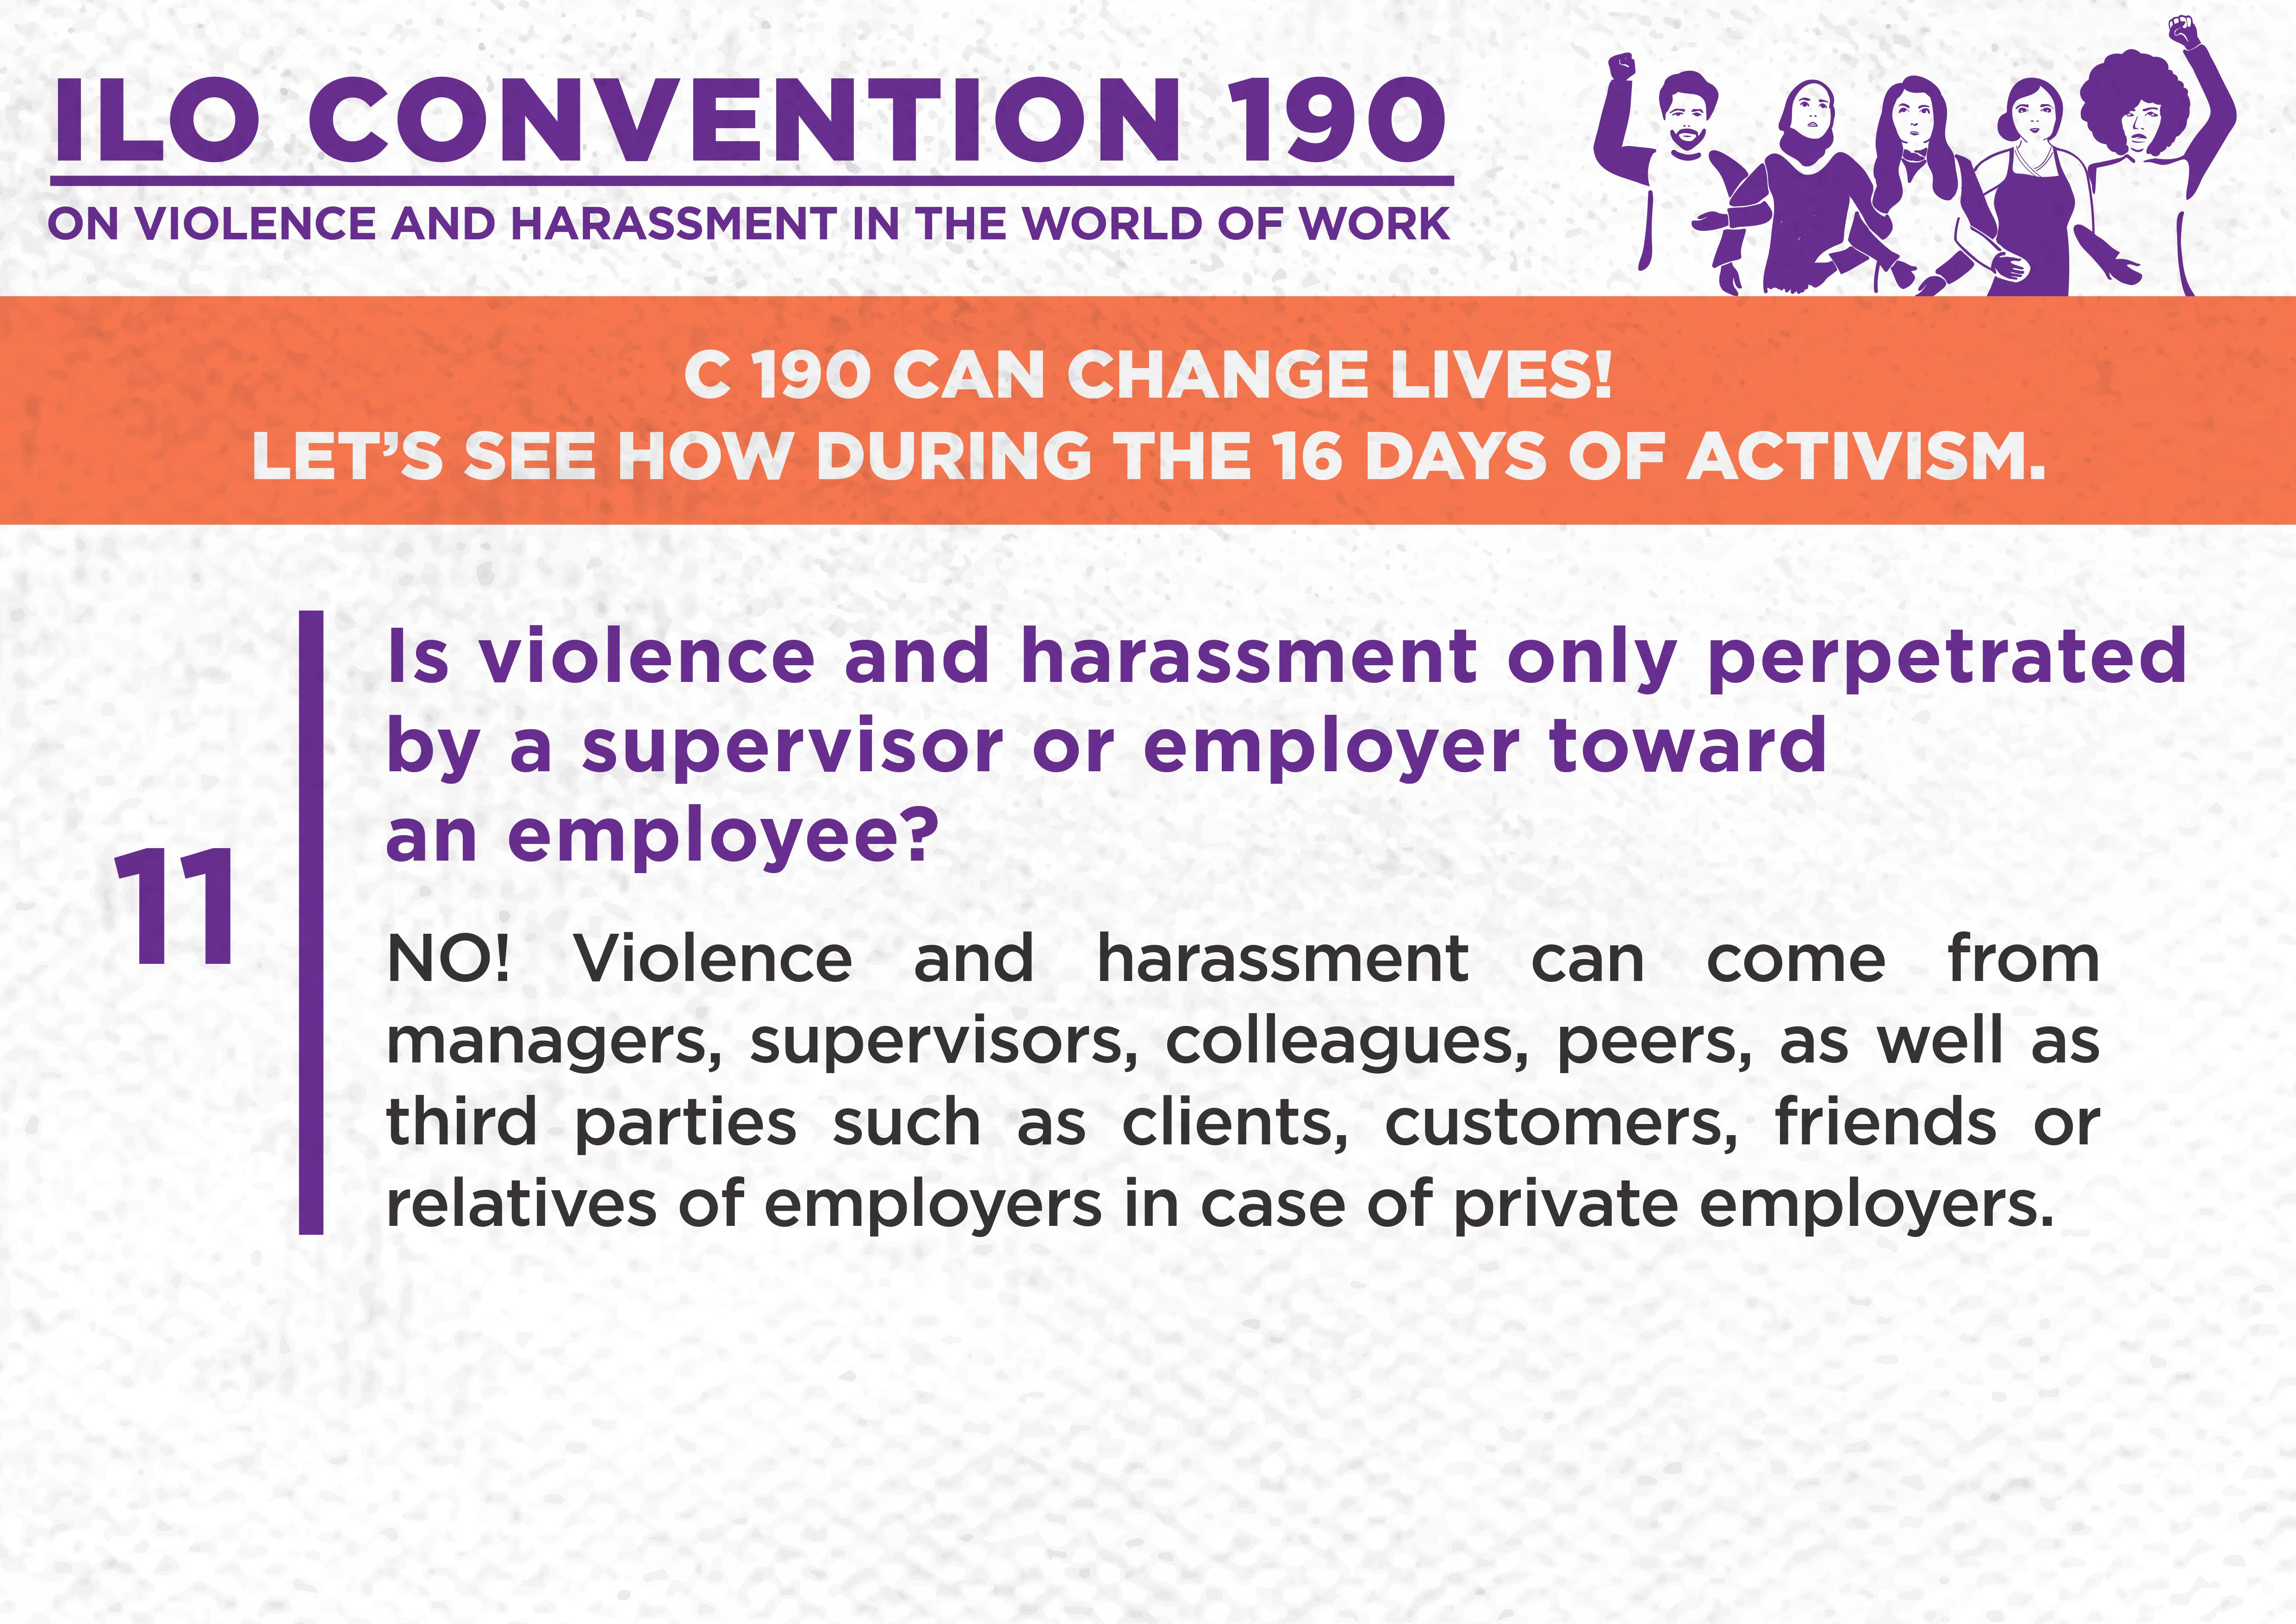 11. Is violence and harassment only perpetrated by a supervisor or employer toward an employee?